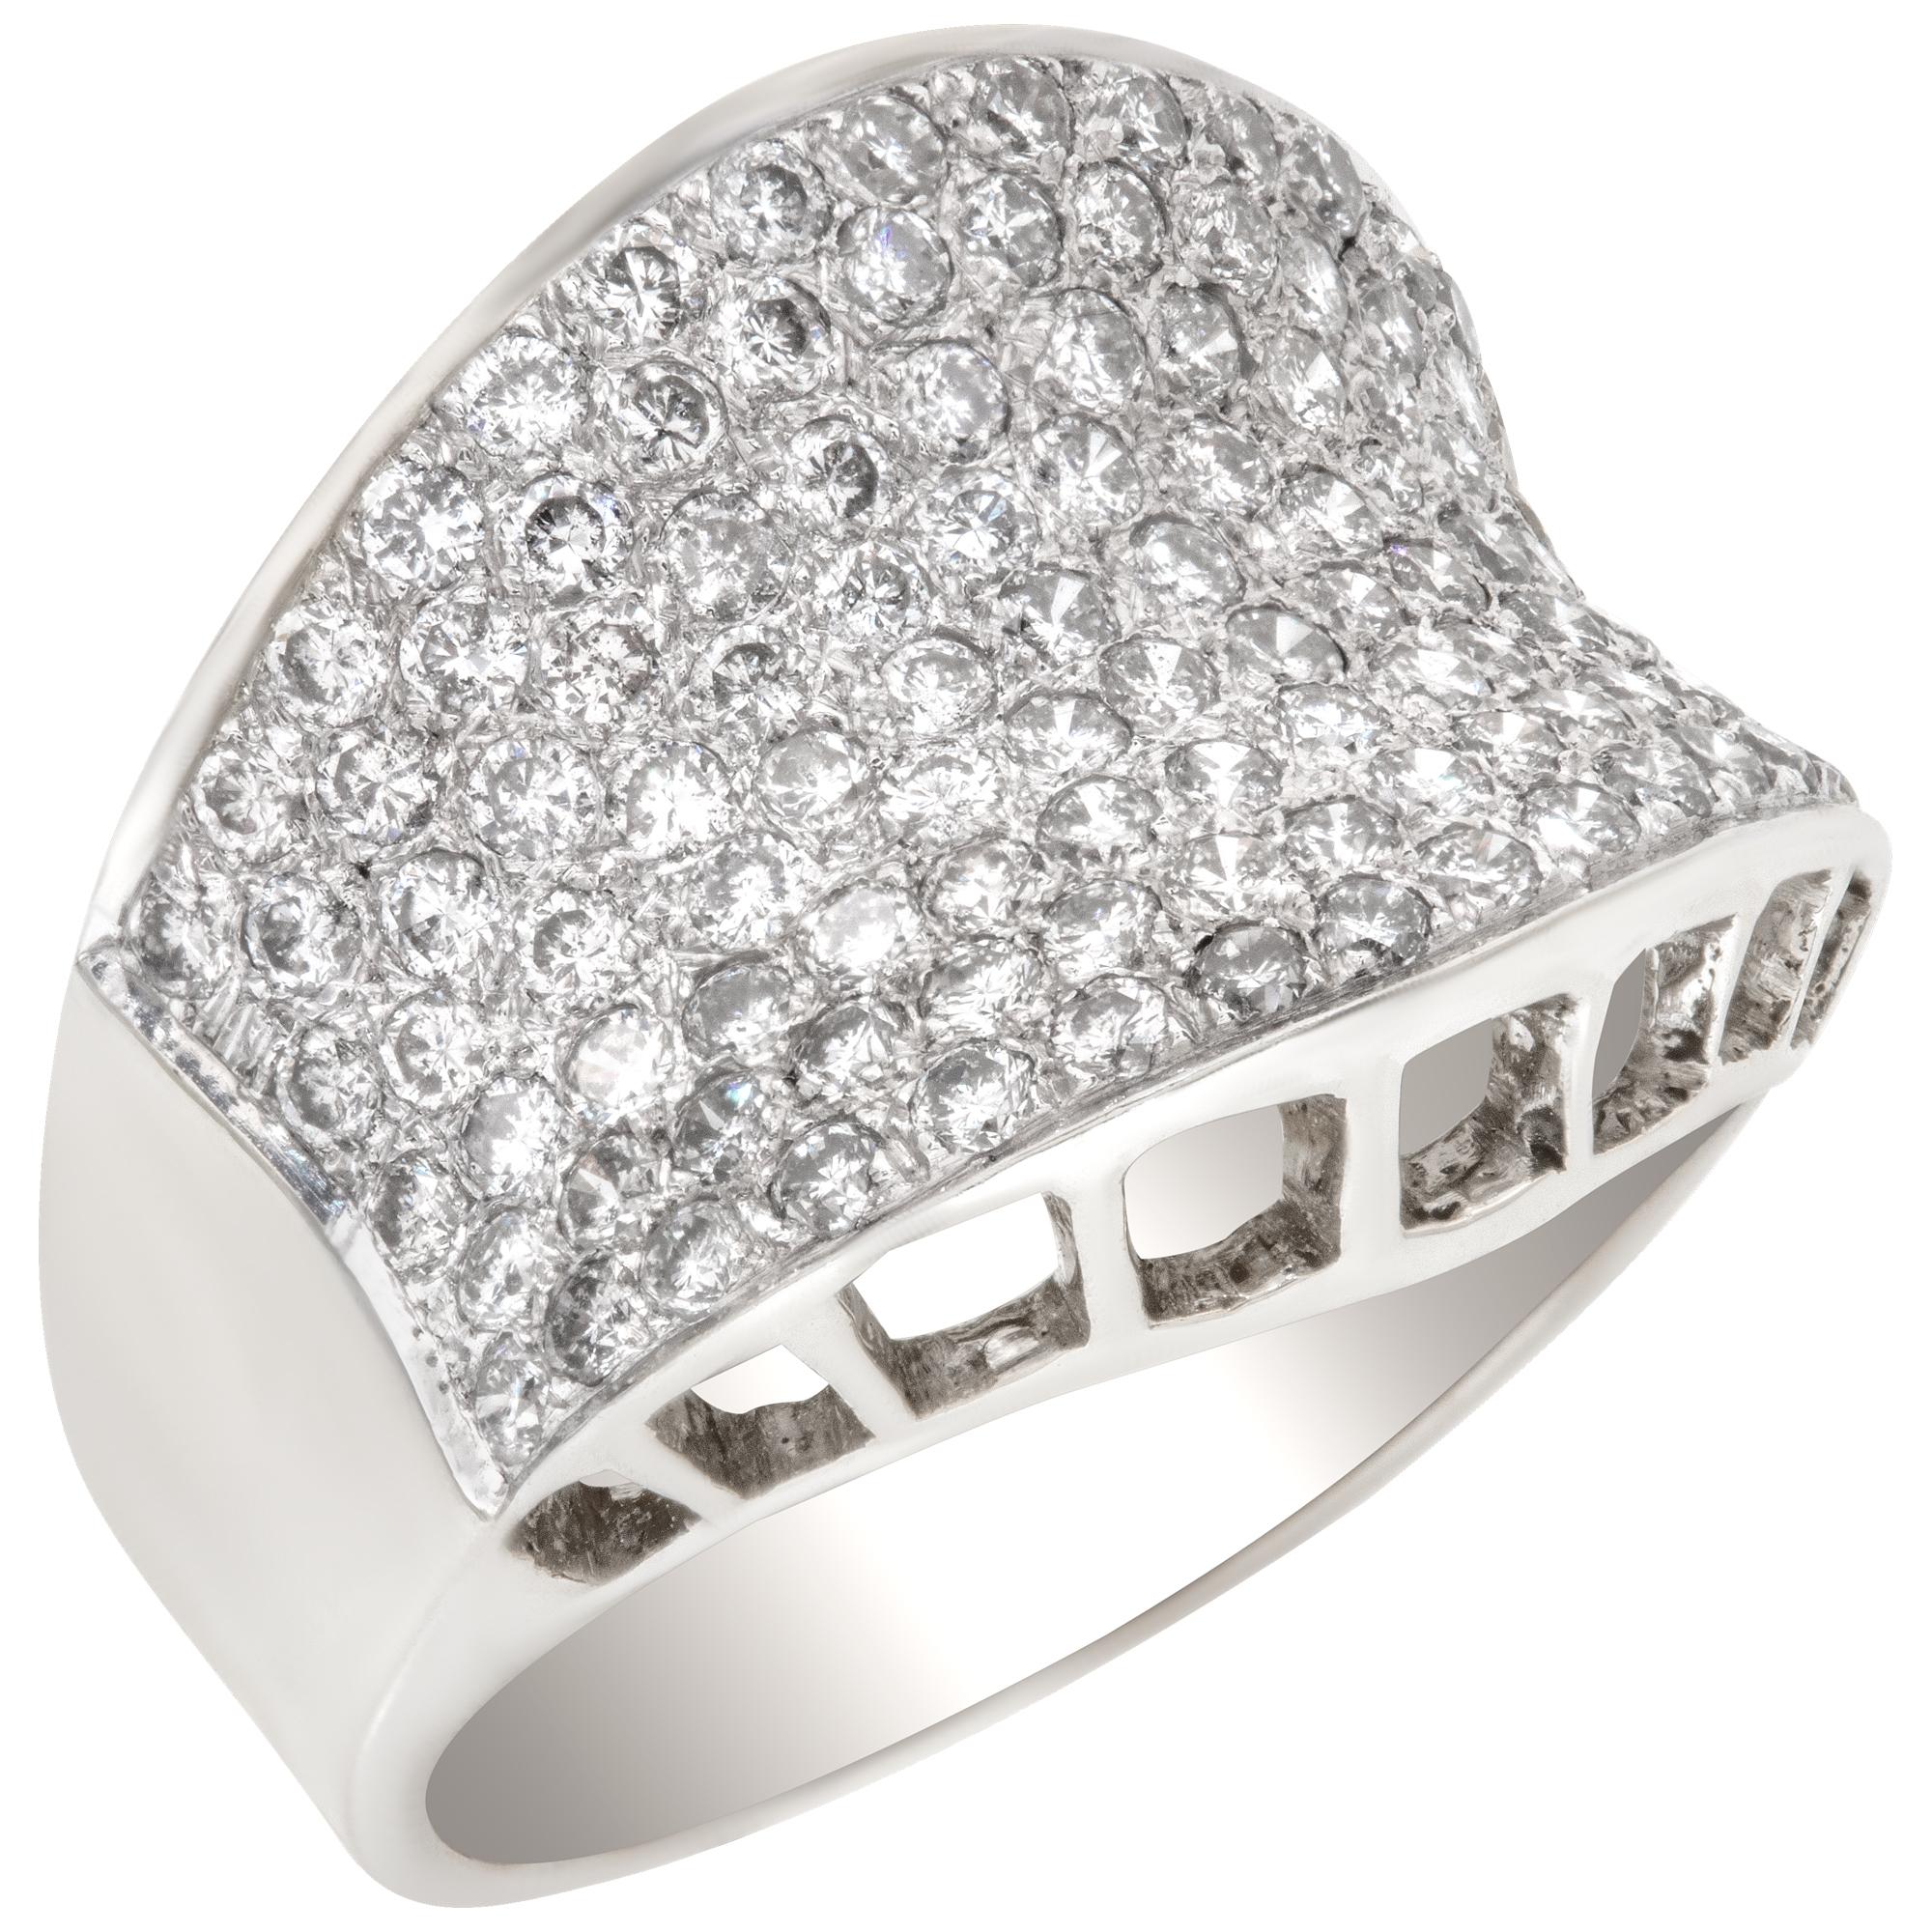 Round Cut Exquisite Pave Diamond Ring in 18k White Gold. 1.25 Carats in Pave Diamonds For Sale